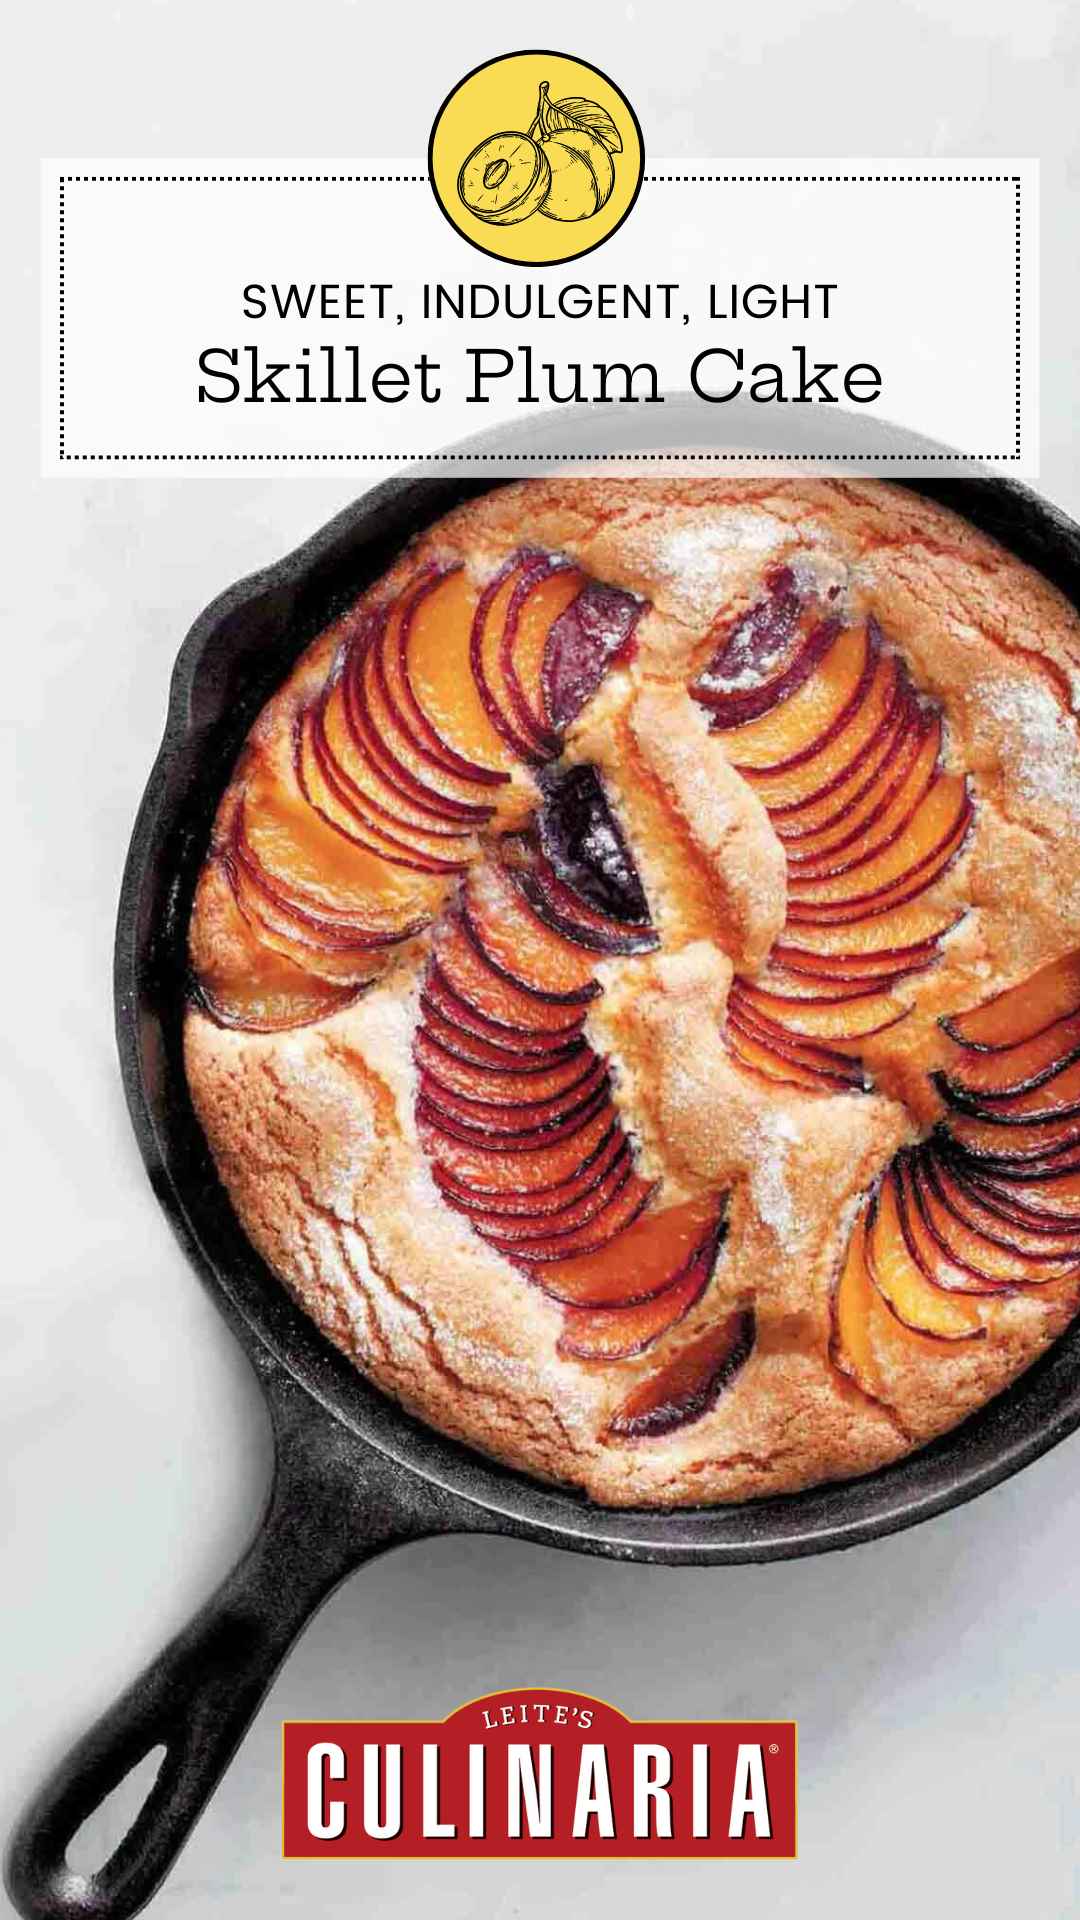 A cake in a cast iron skillet with sliced plums fanned across the surface and baked into the cake.